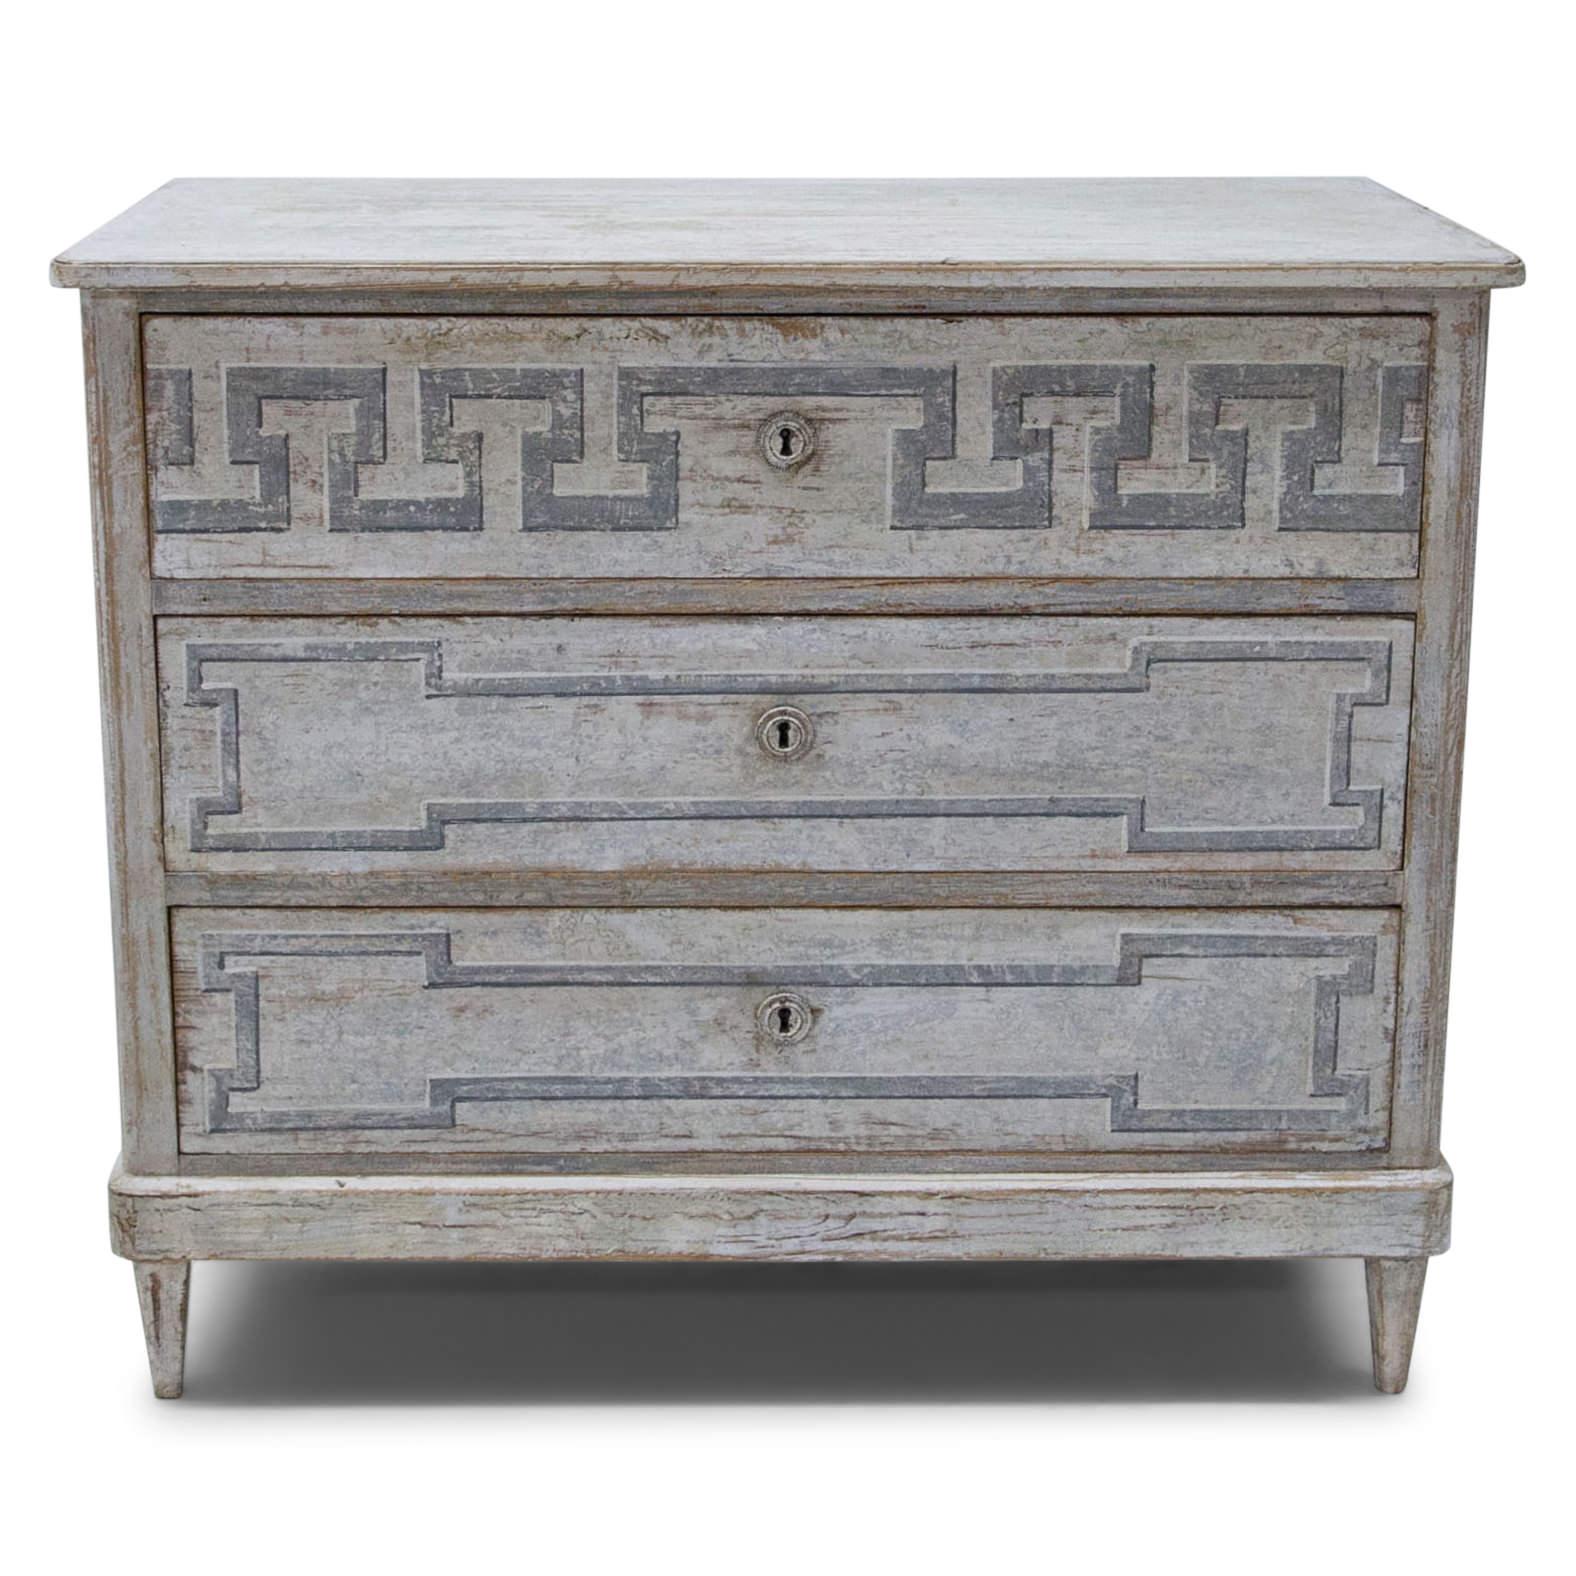 Three-drawer Biedermeier chest of drawers on short tapered feet with a streamlined body and rounded corners. The Gustavian-style paintjob is new and shows Meander décor on top and fillings in grey on white ground. The paintjob has a used-looking